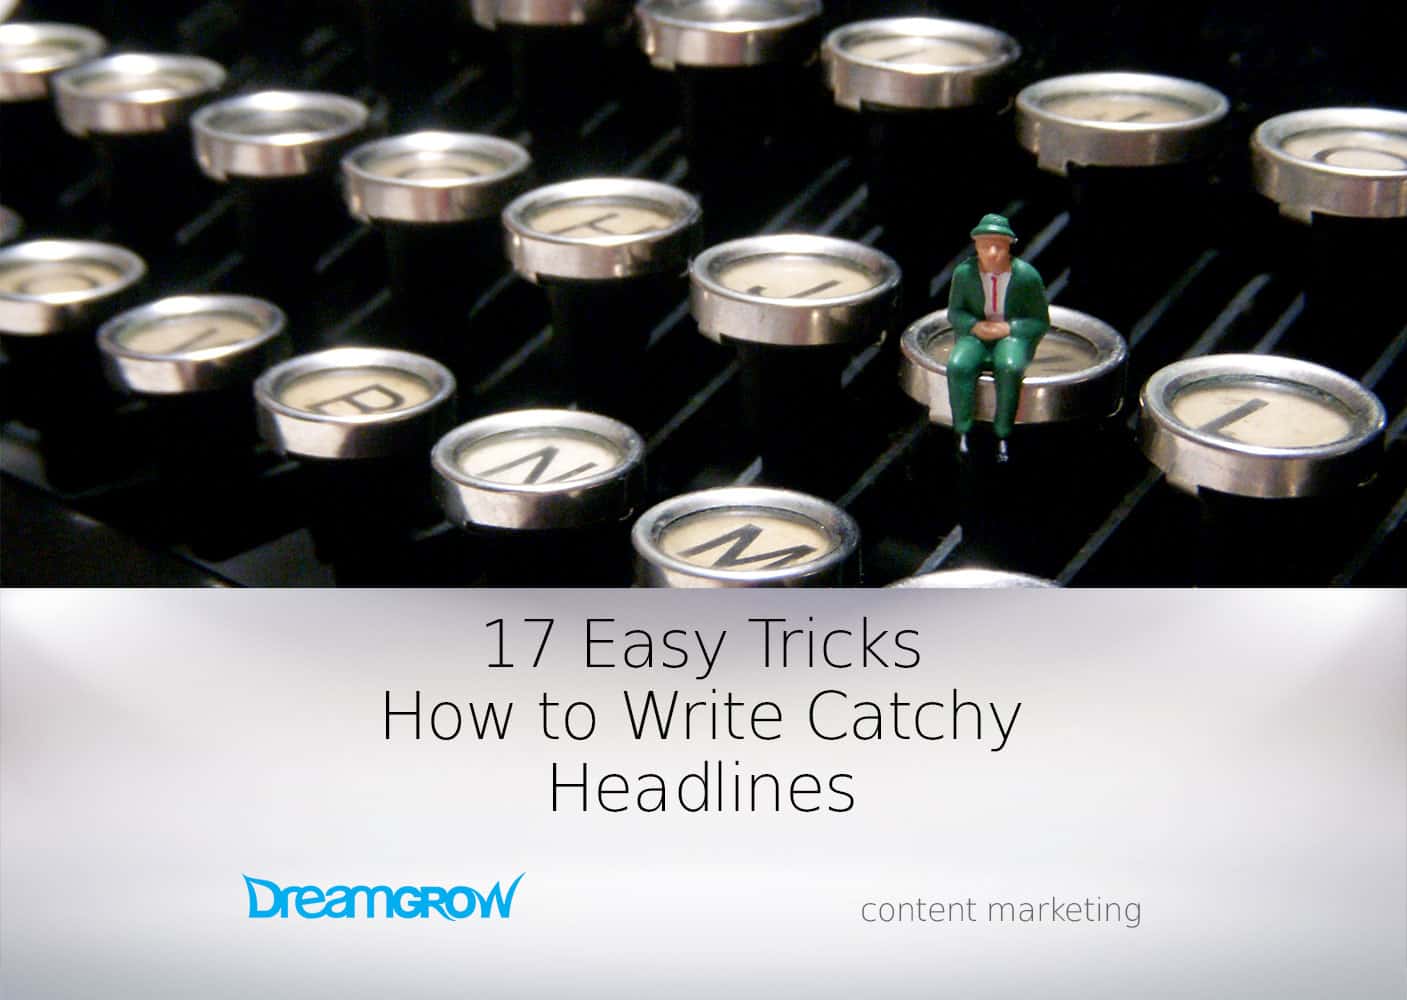 16 Helpful Copywriting Articles To Launch You Into Web Writing Greatness